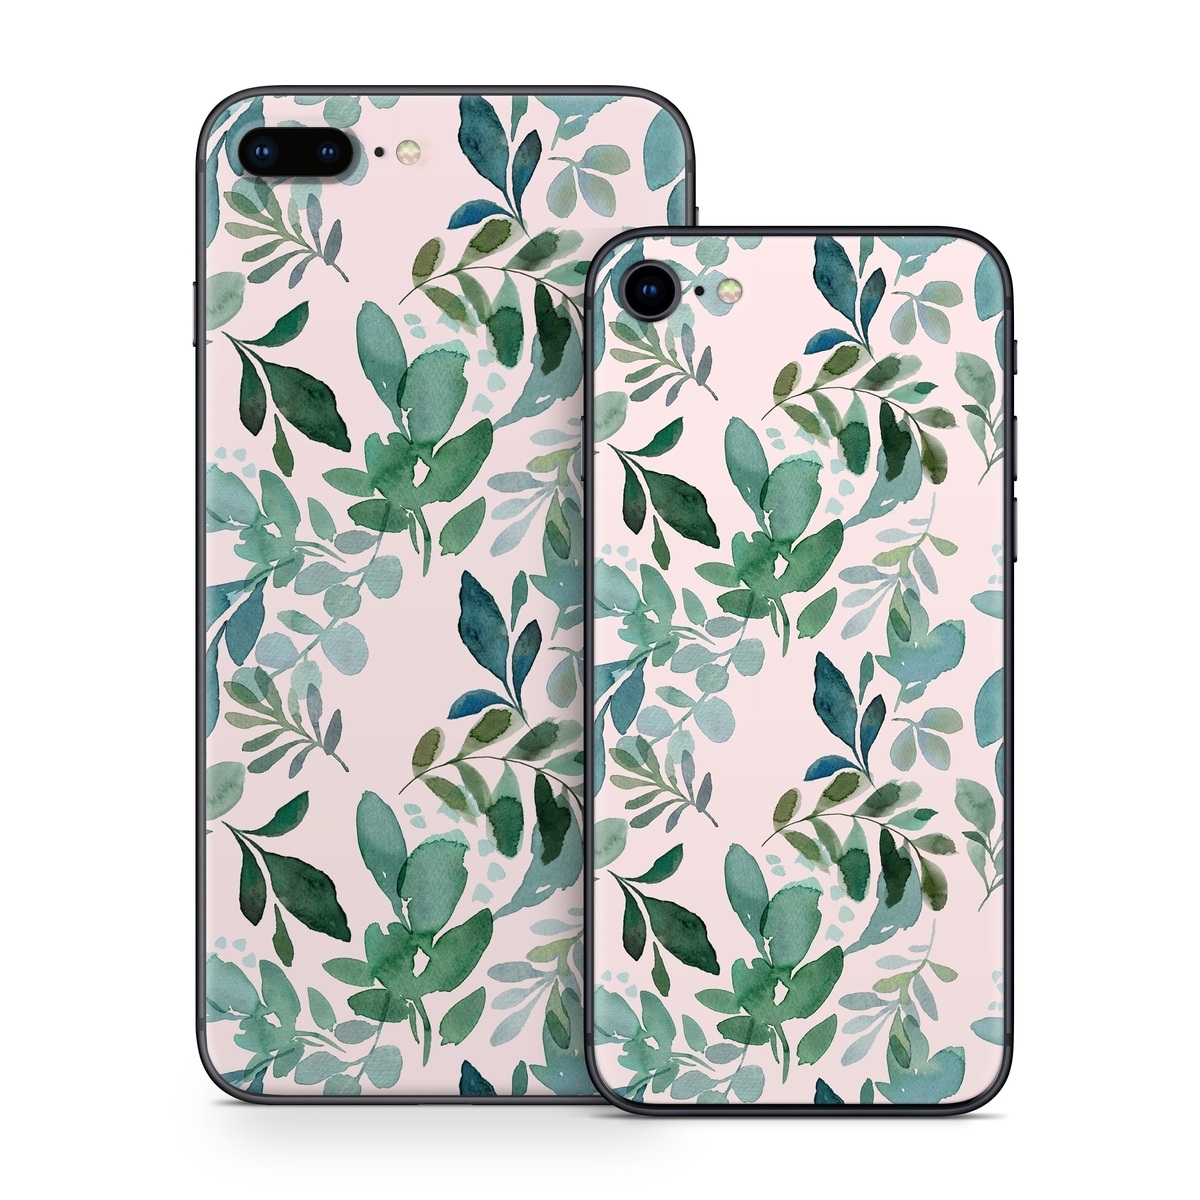 iPhone 8 Series Skin design of Pattern, Green, Leaf, Design, Plant, Tree, Military camouflage, with white, green, blue colors